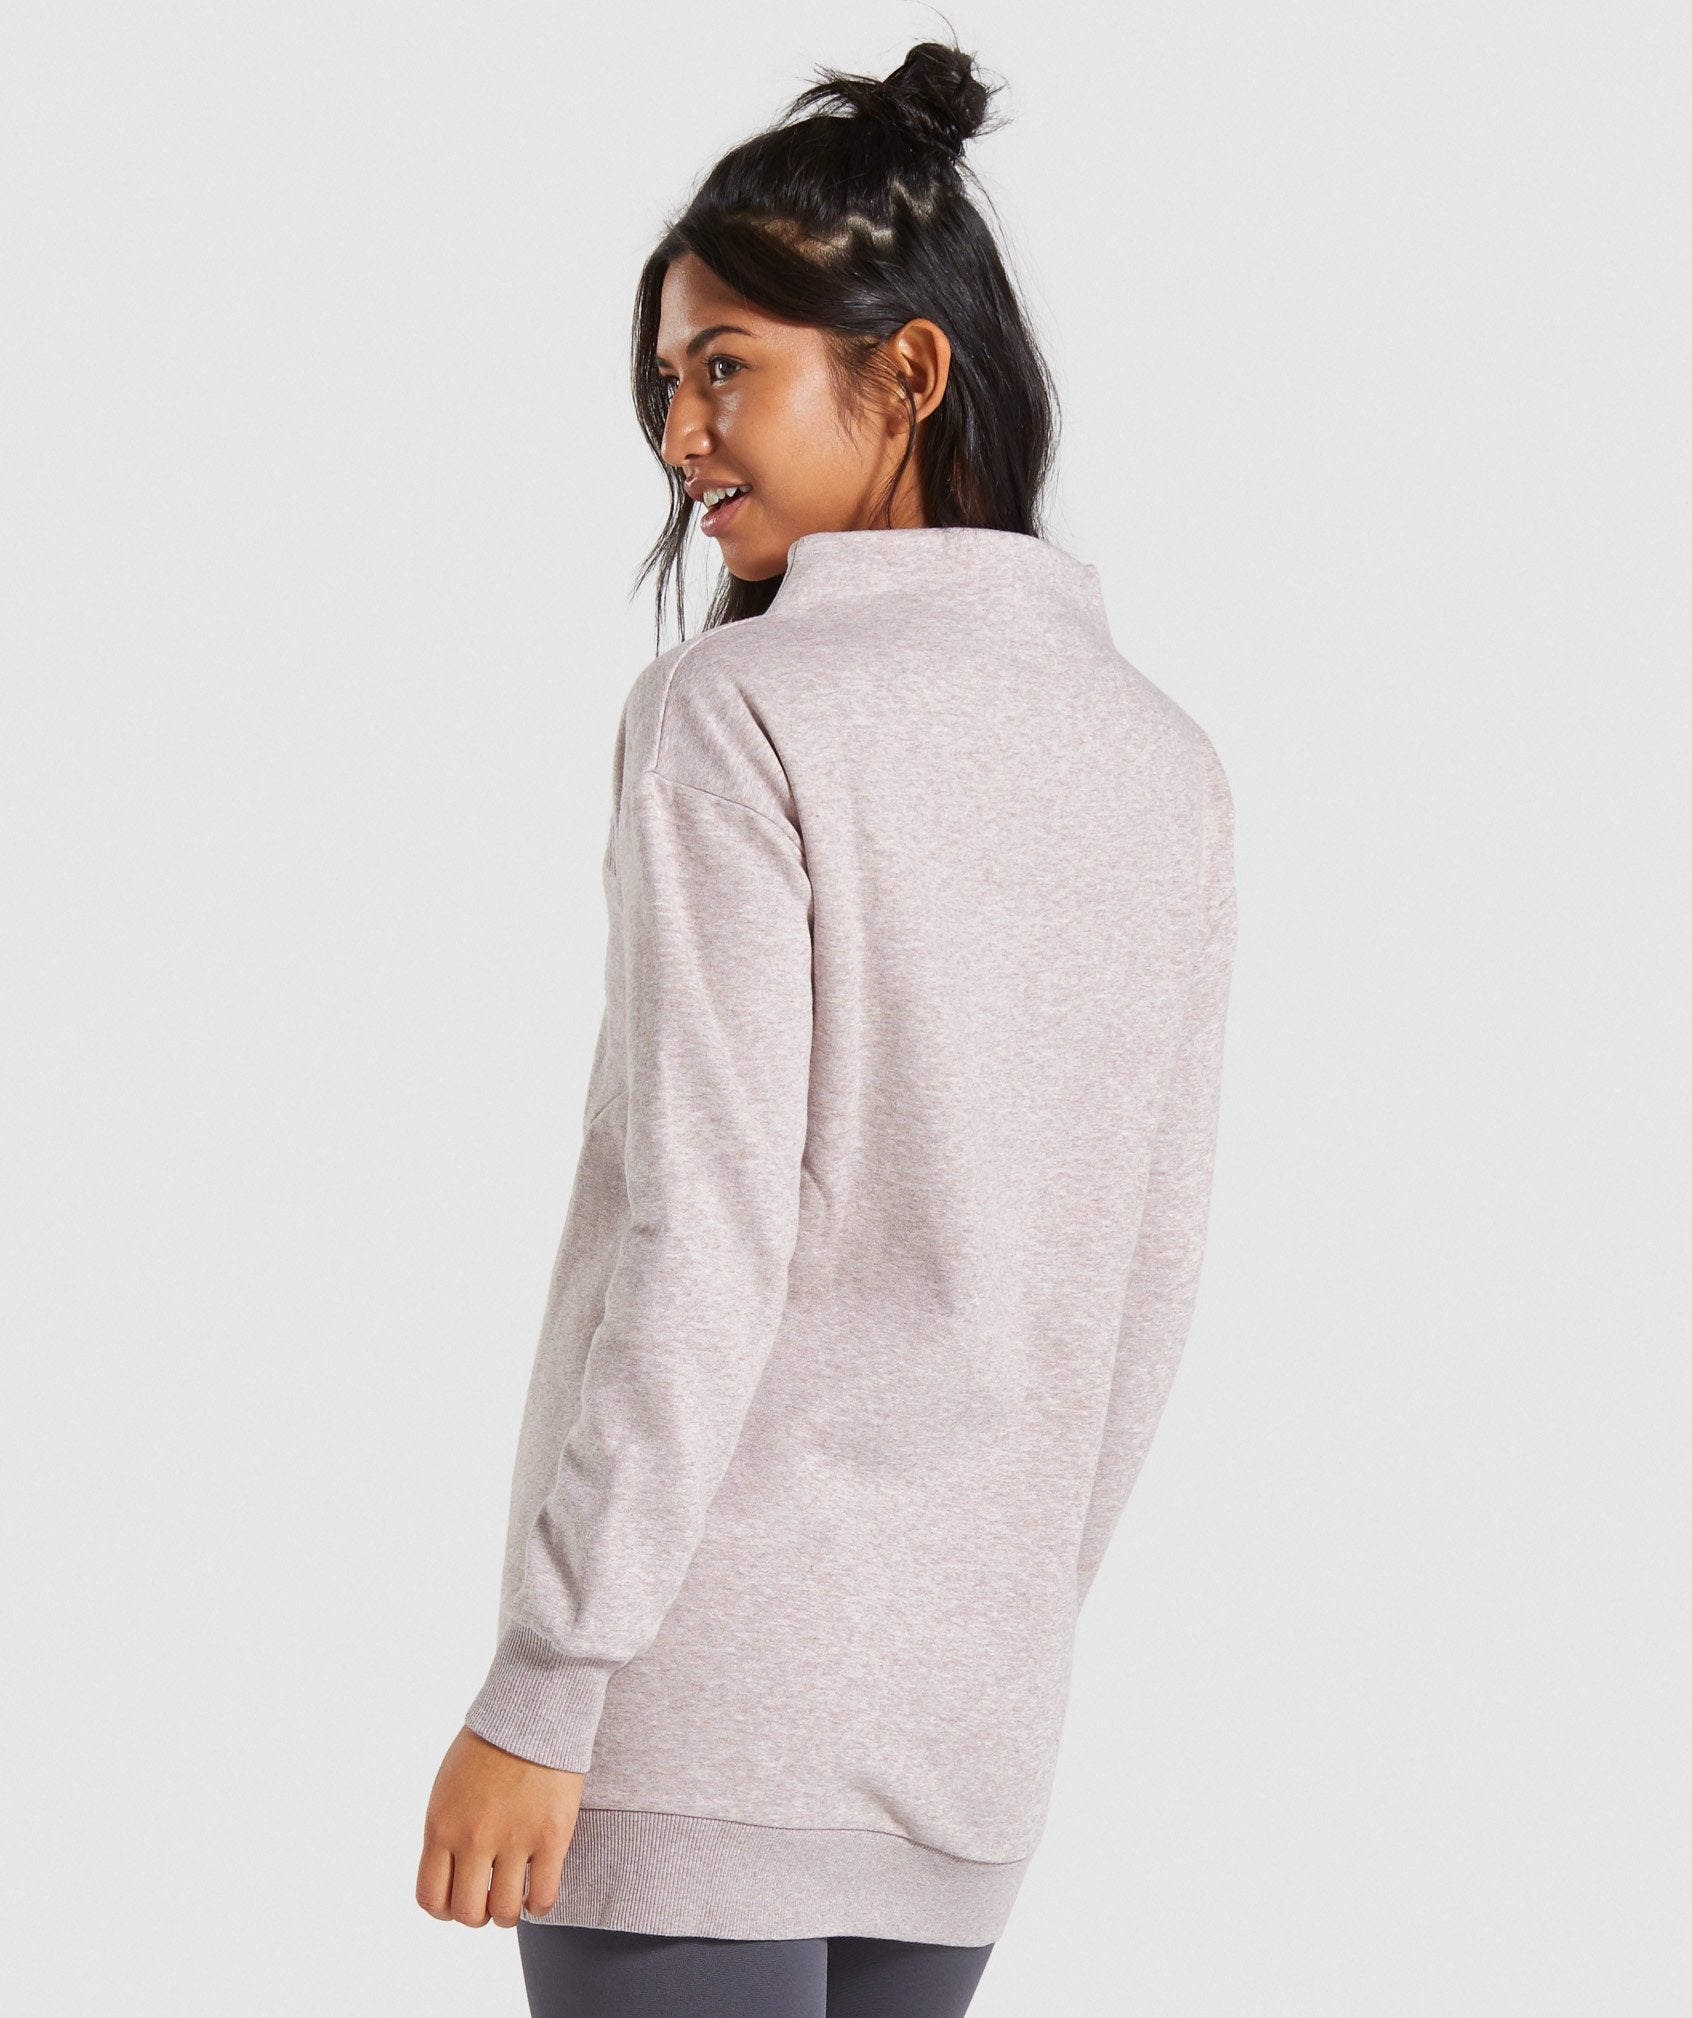 So Soft Sweater in Taupe Marl - view 2